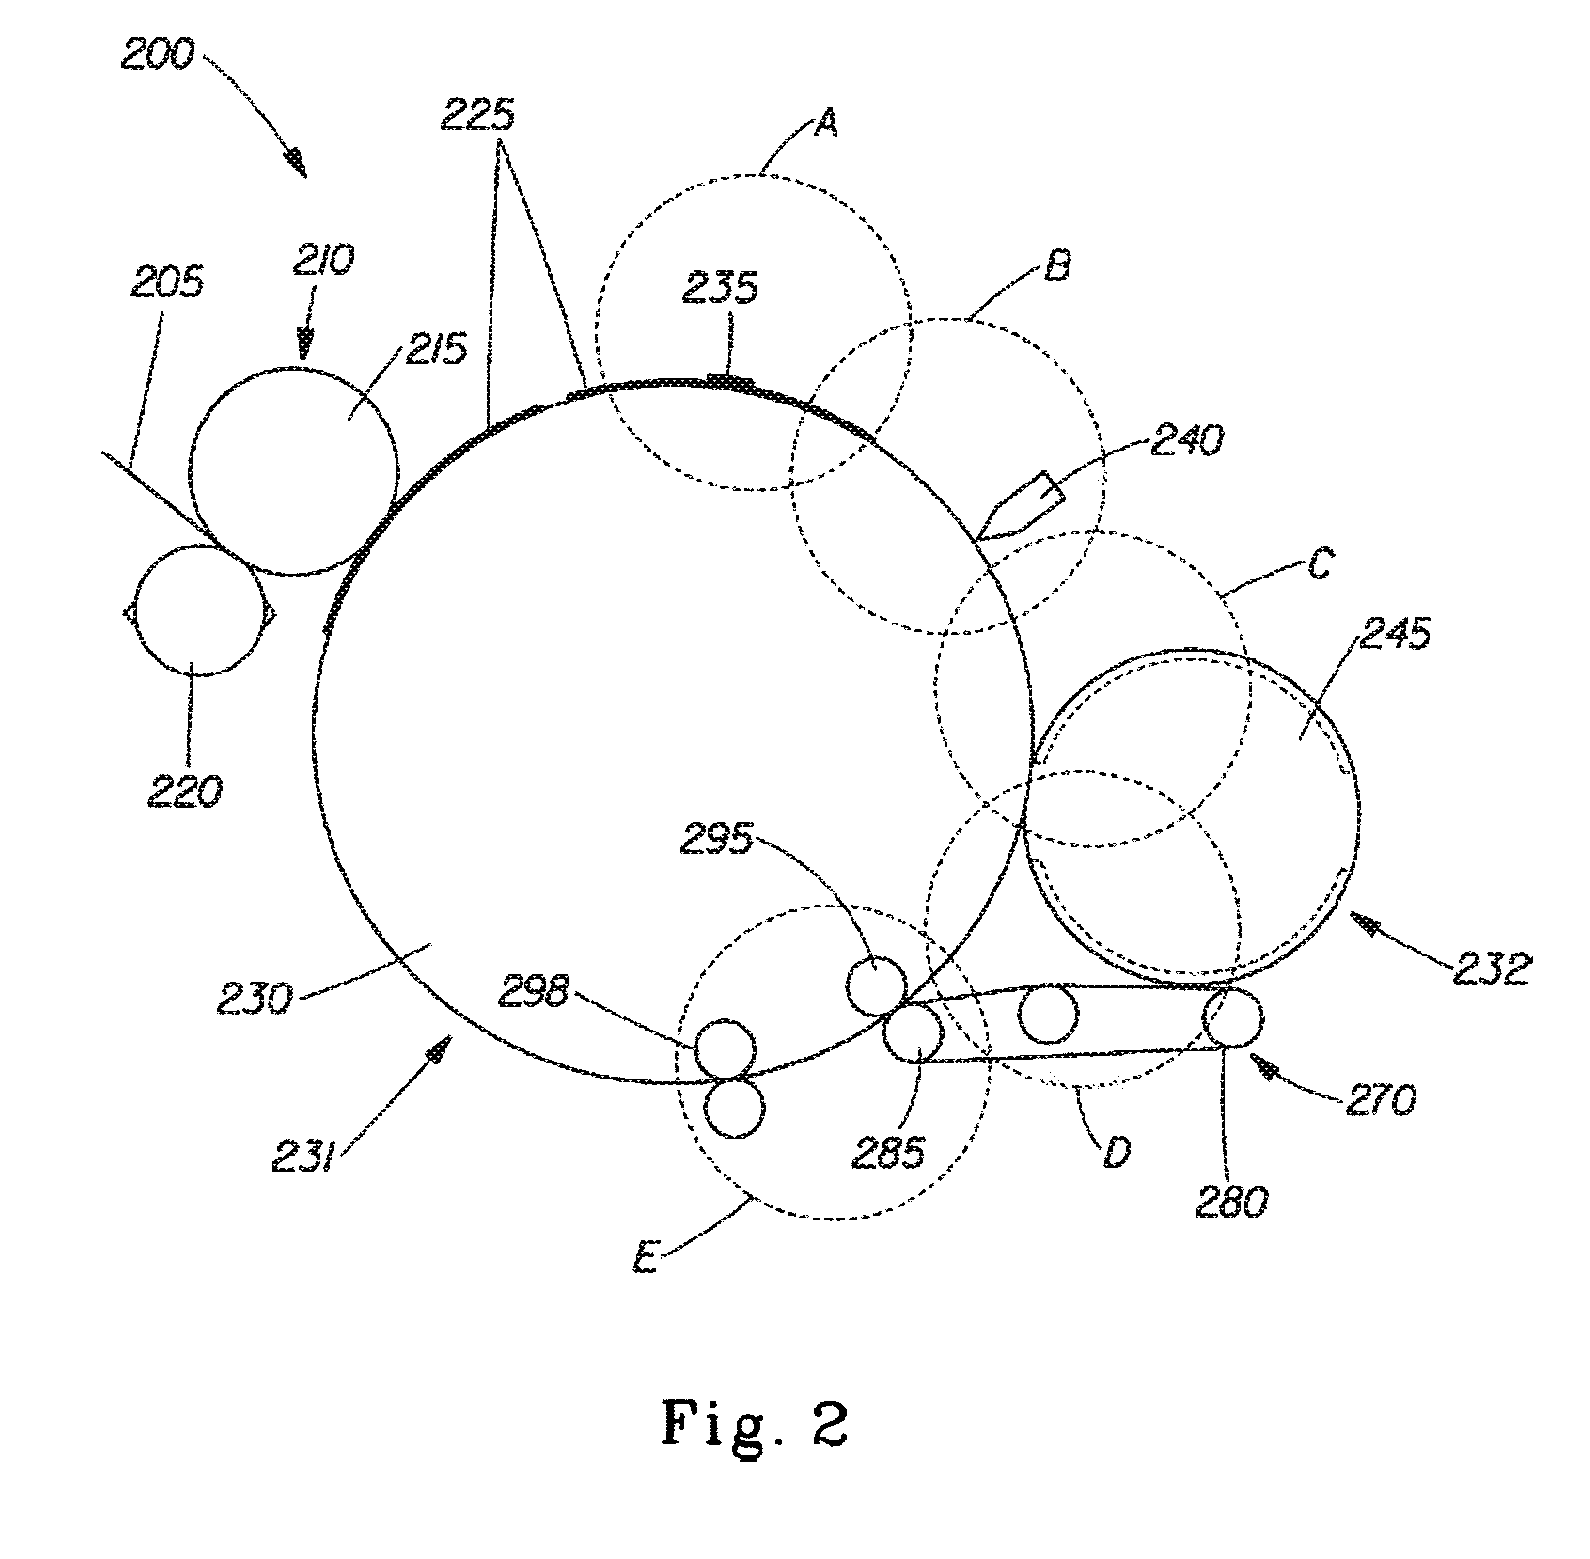 System for Bifolding an Absorbent Article